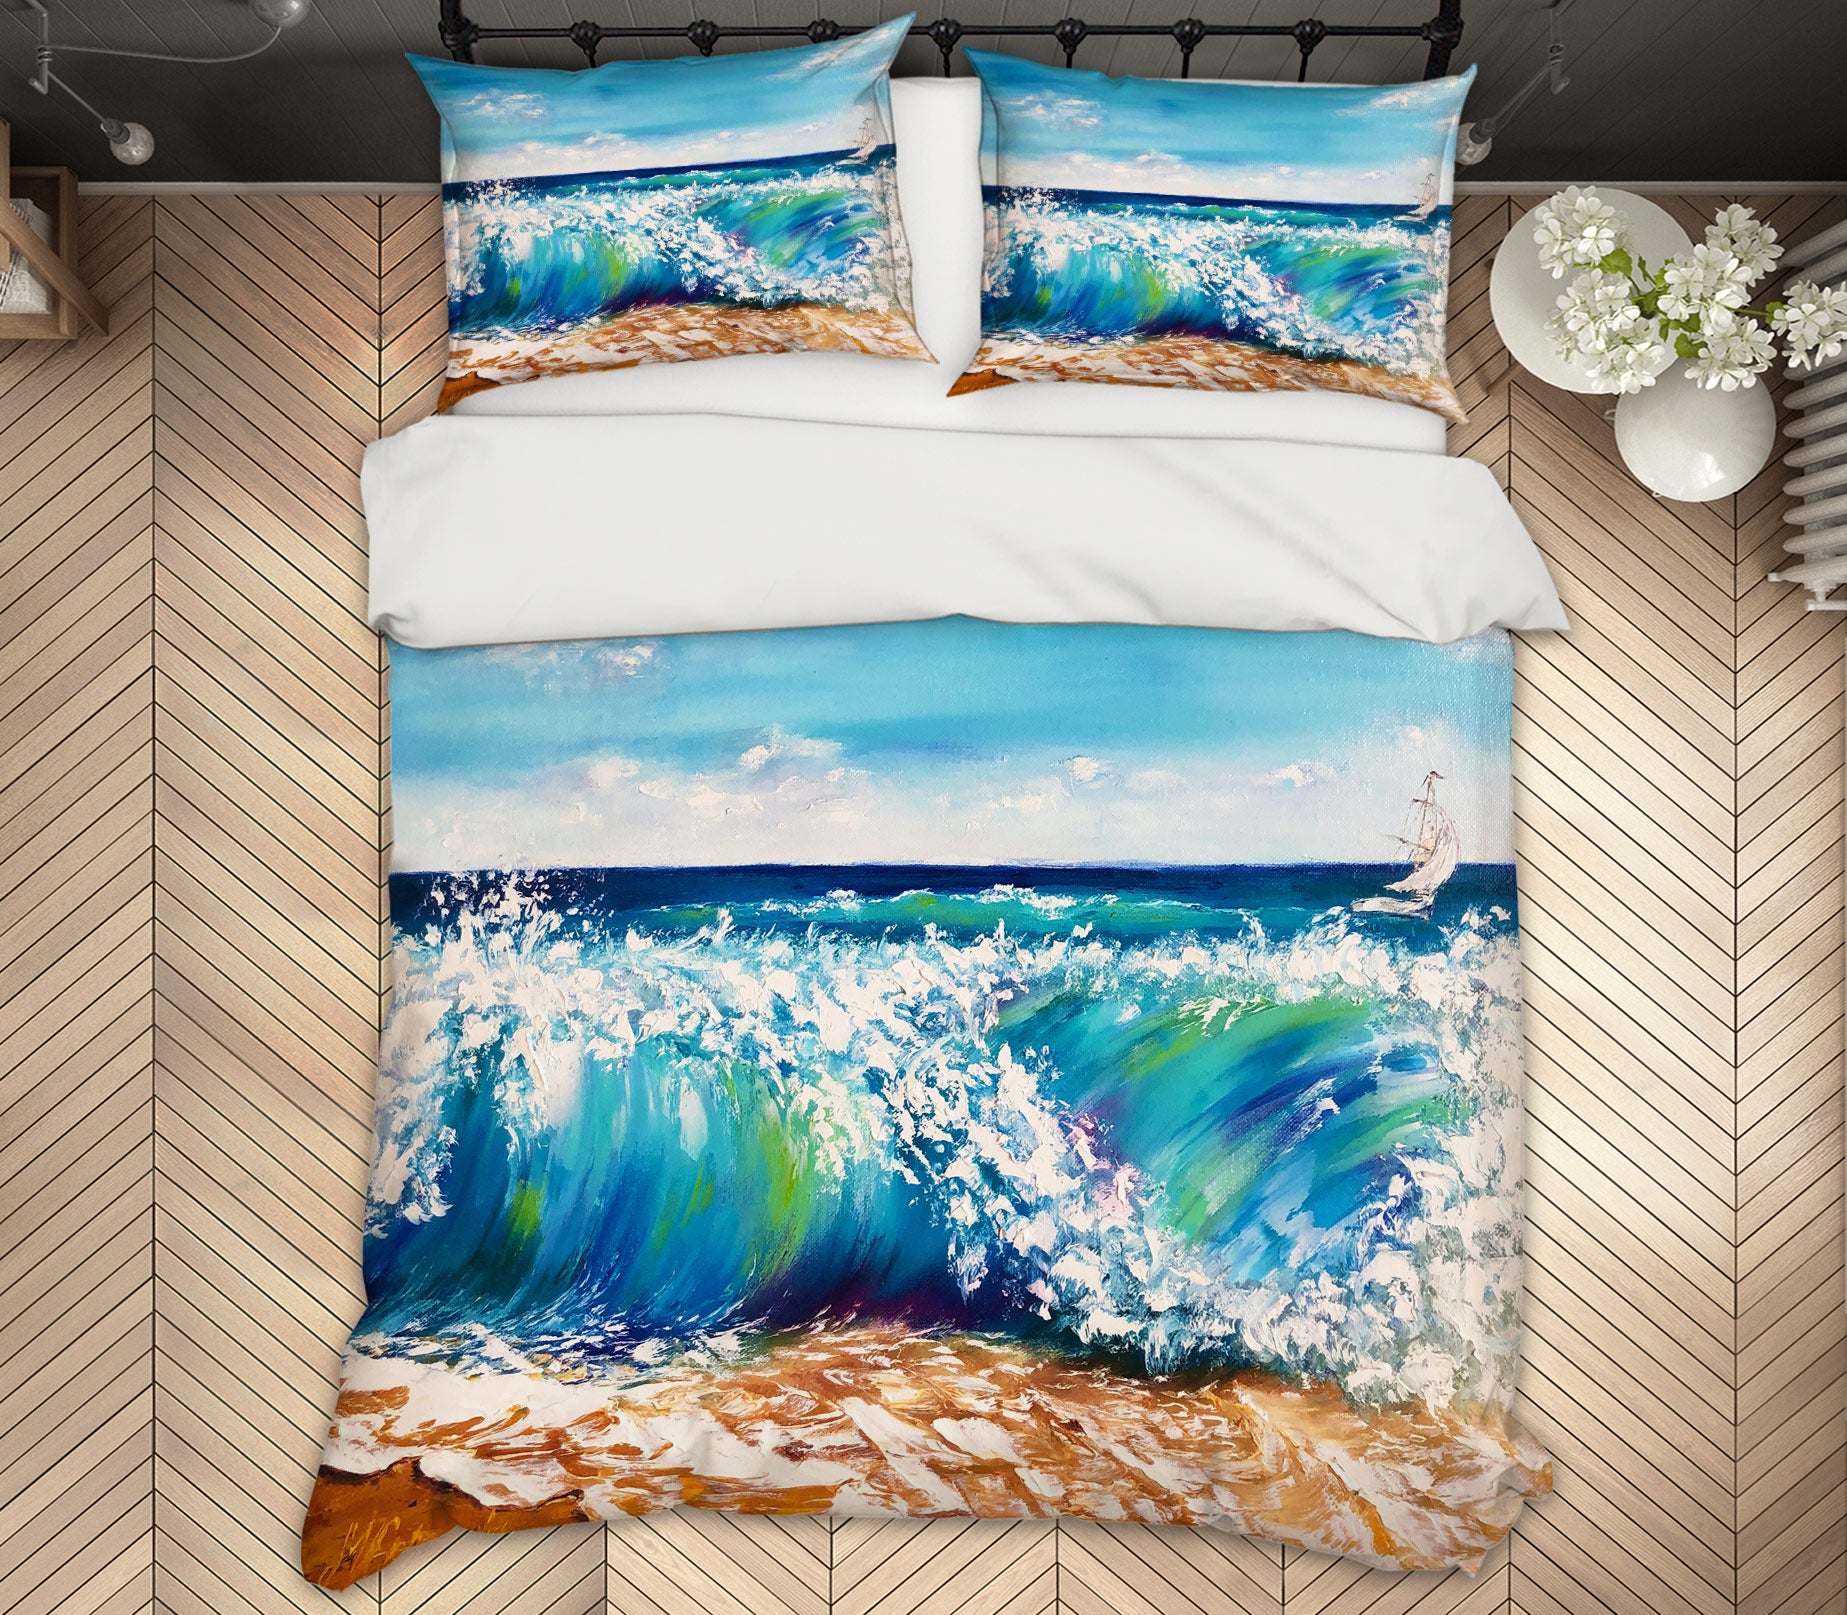 3D Painted Waves 481 Skromova Marina Bedding Bed Pillowcases Quilt